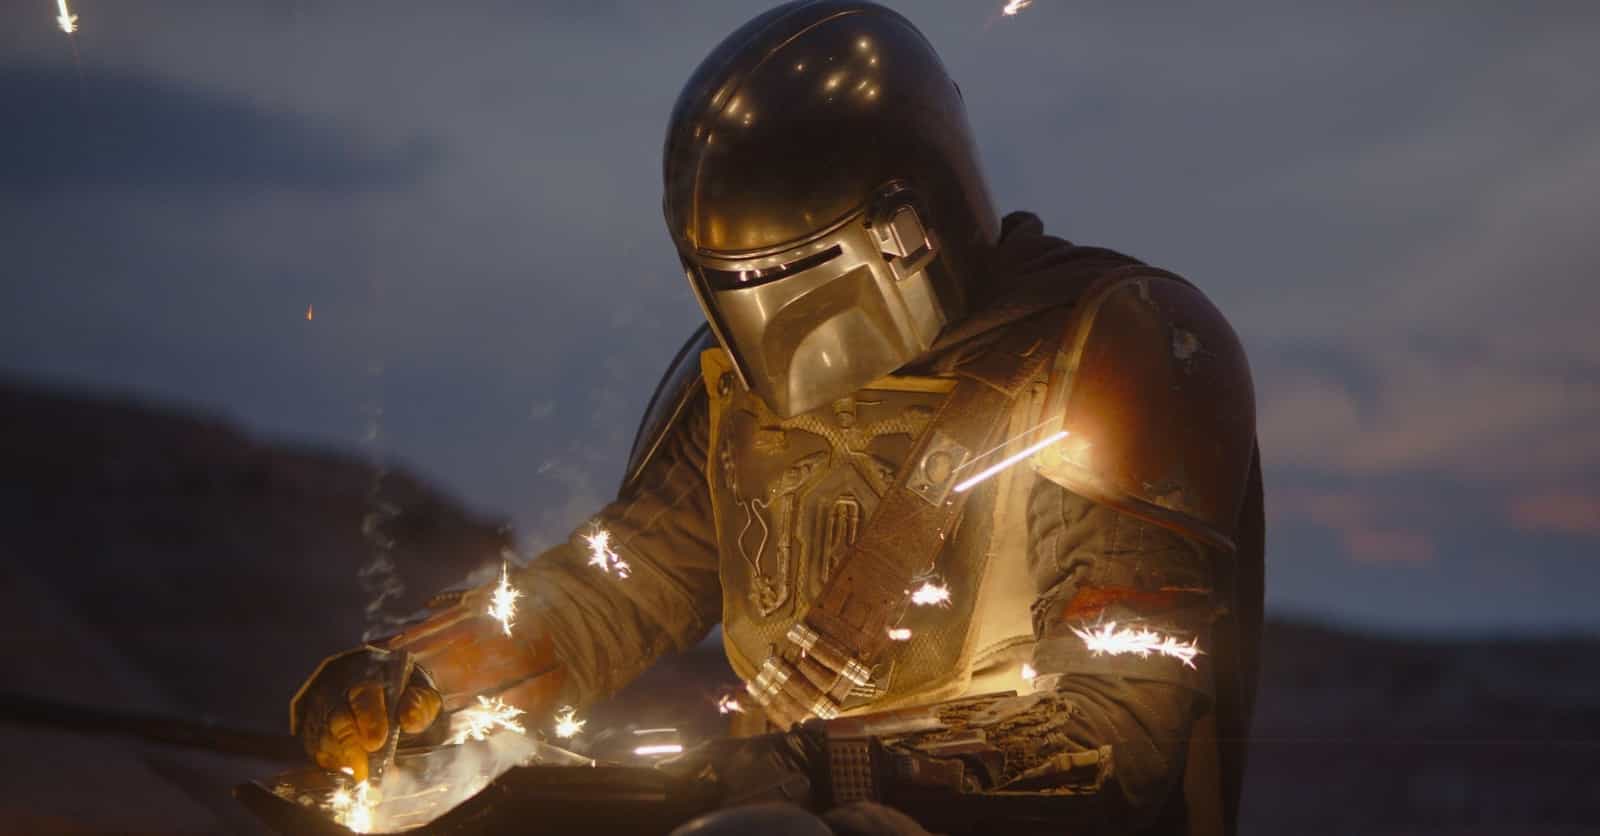 What Is Beskar Steel And Why Is It So Important On ‘The Mandalorian’?